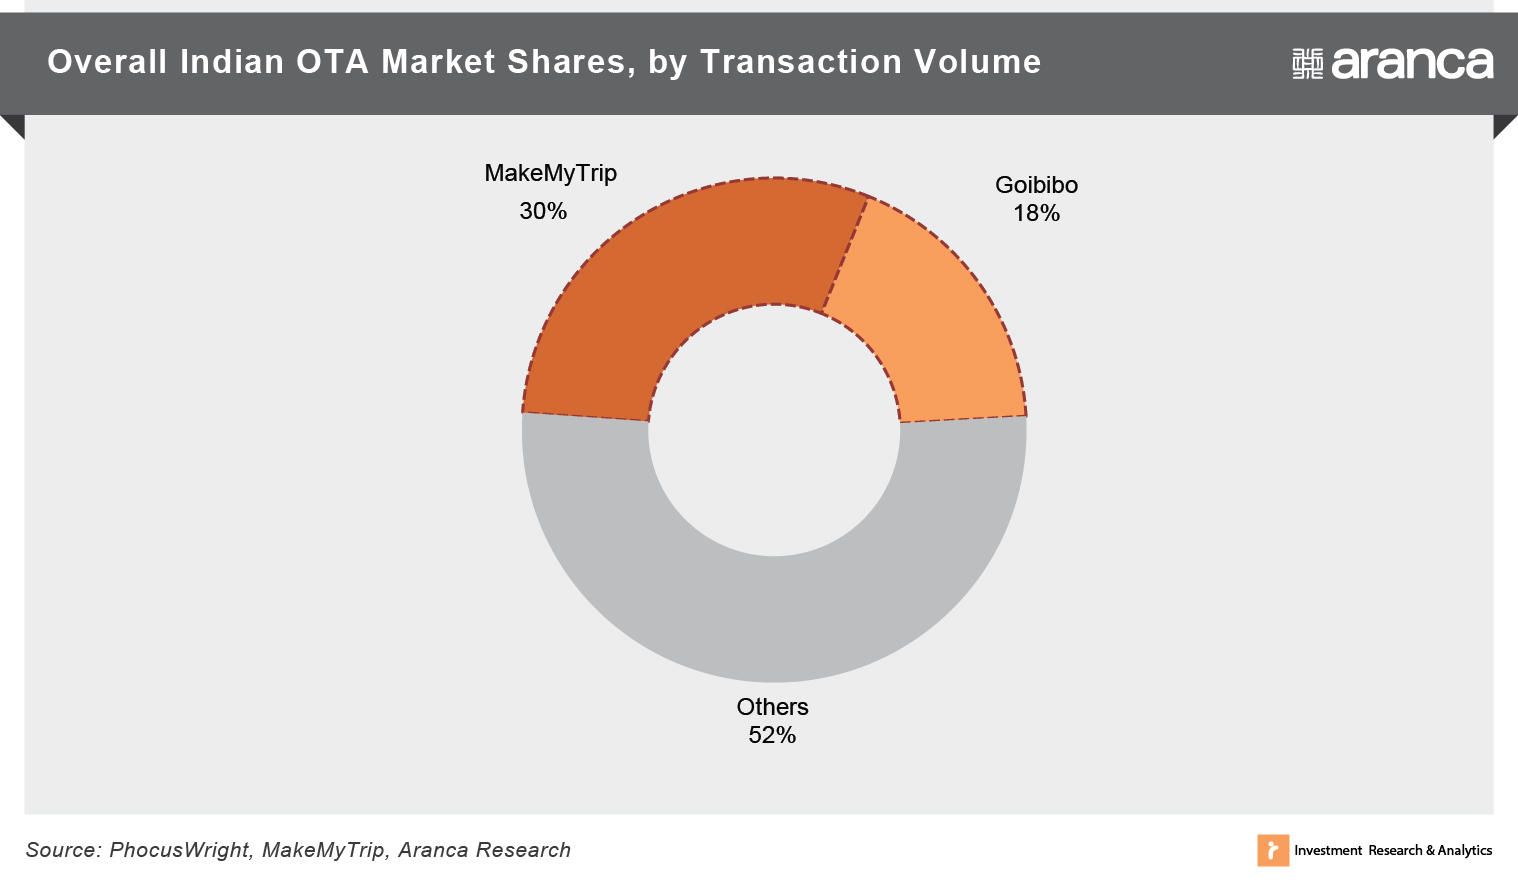 Overall Indian OTA Market Shares